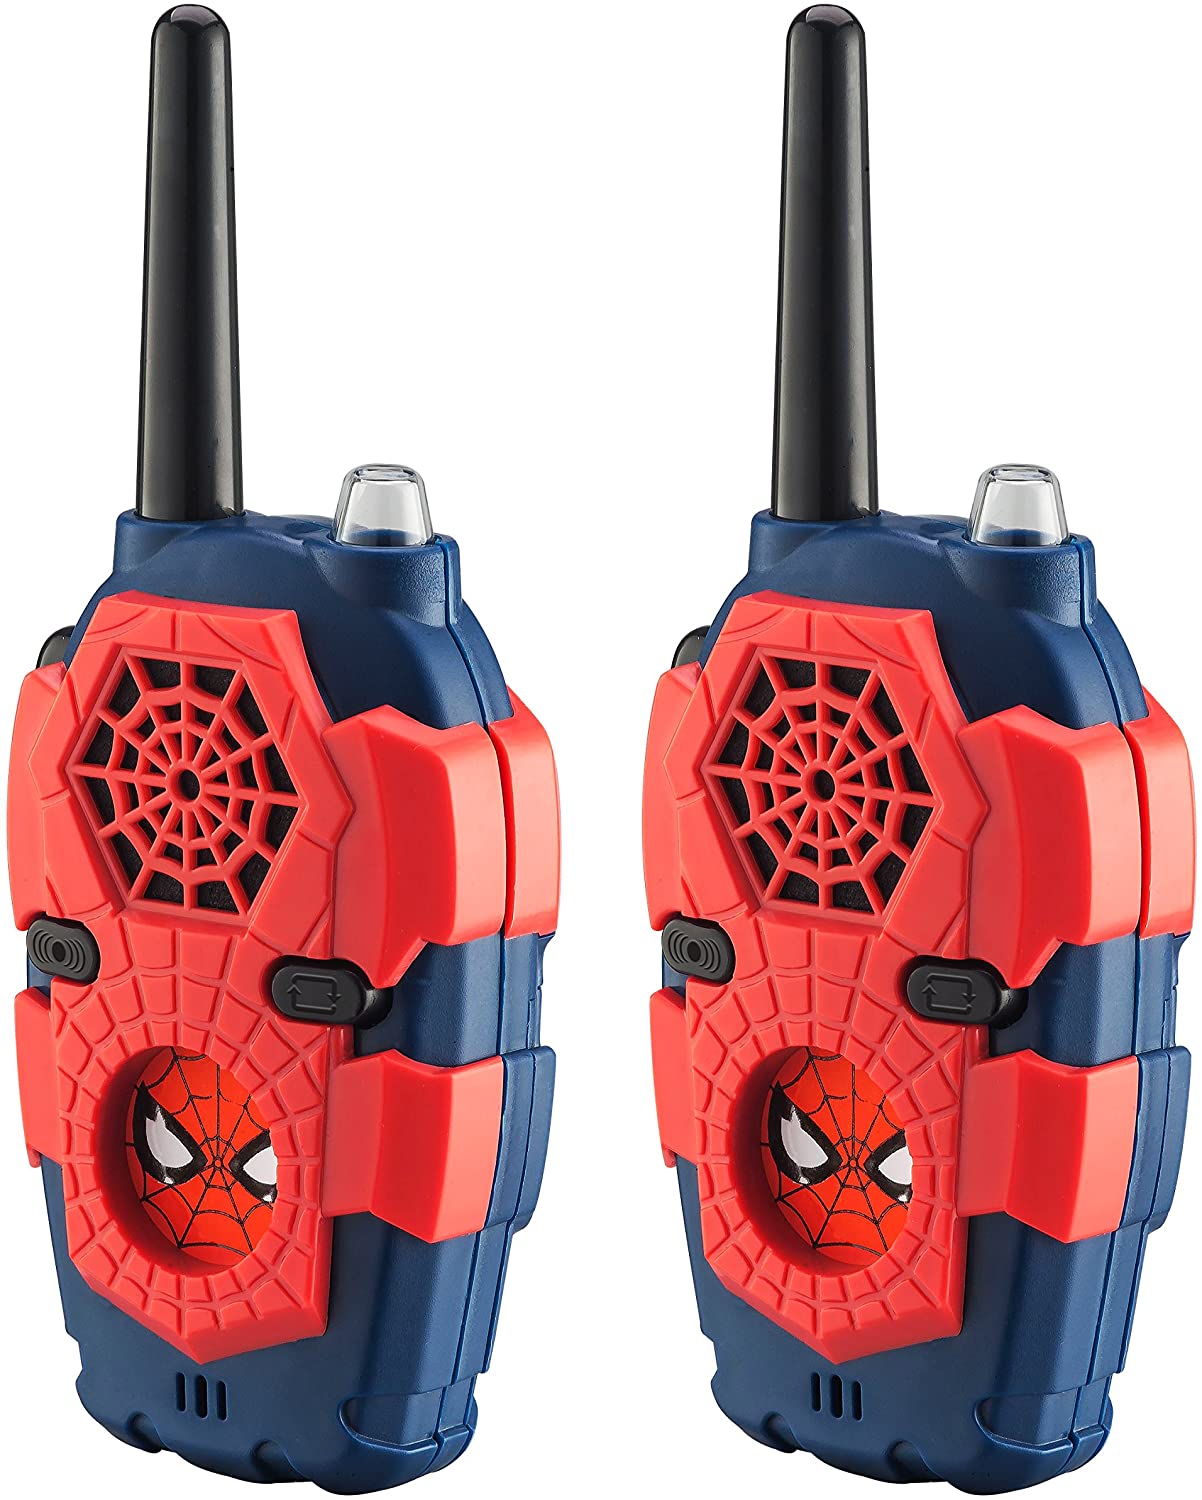 Spider-Man FRS Walkie Talkies for Kids with Lights and Sounds